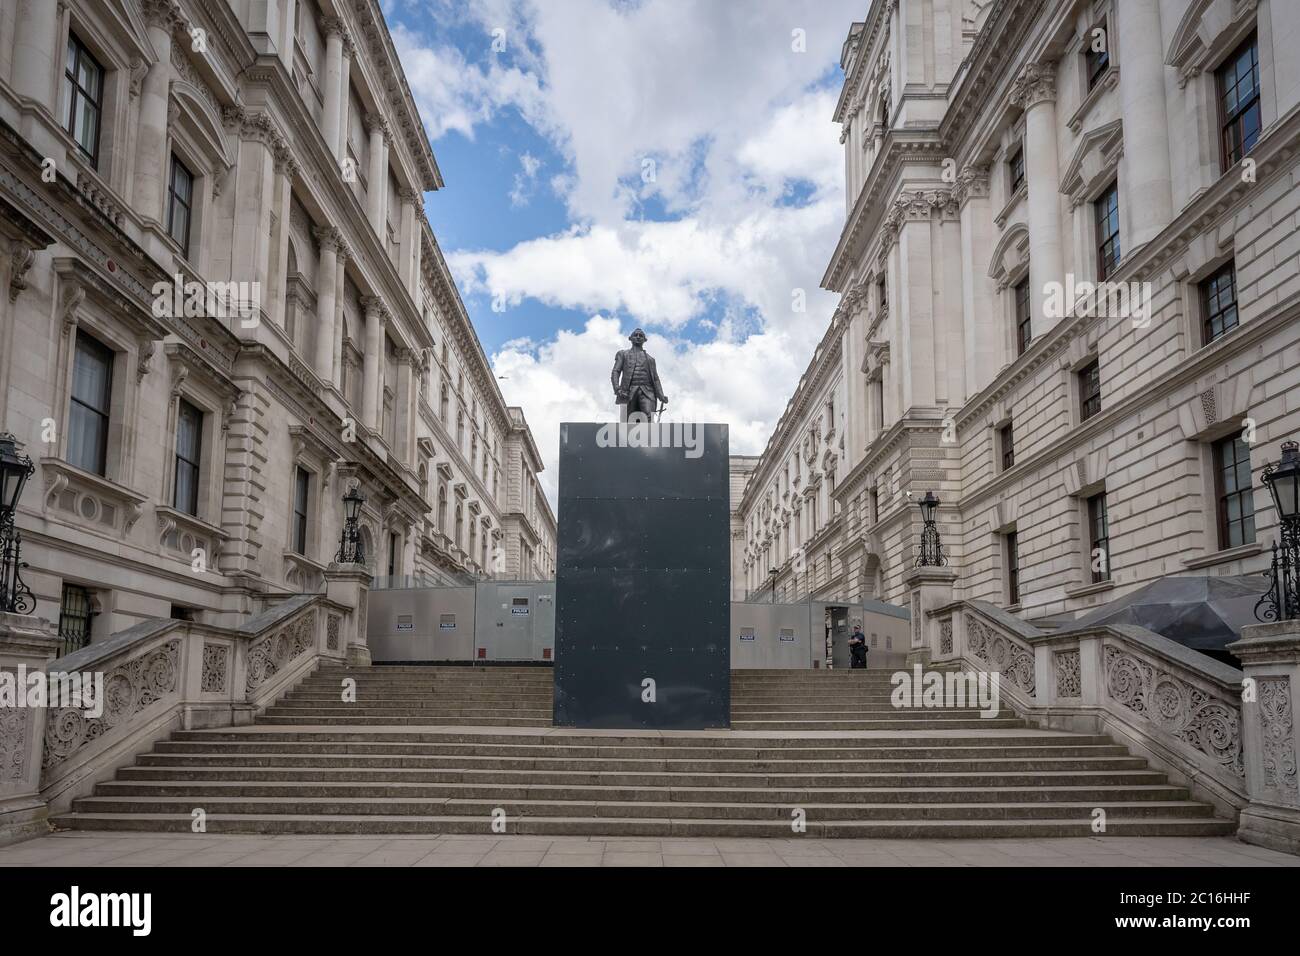 Memorial of Major General Robert Clive stands surrounded by protective cladding on Charles Street, Whitehall, London, UK. Stock Photo